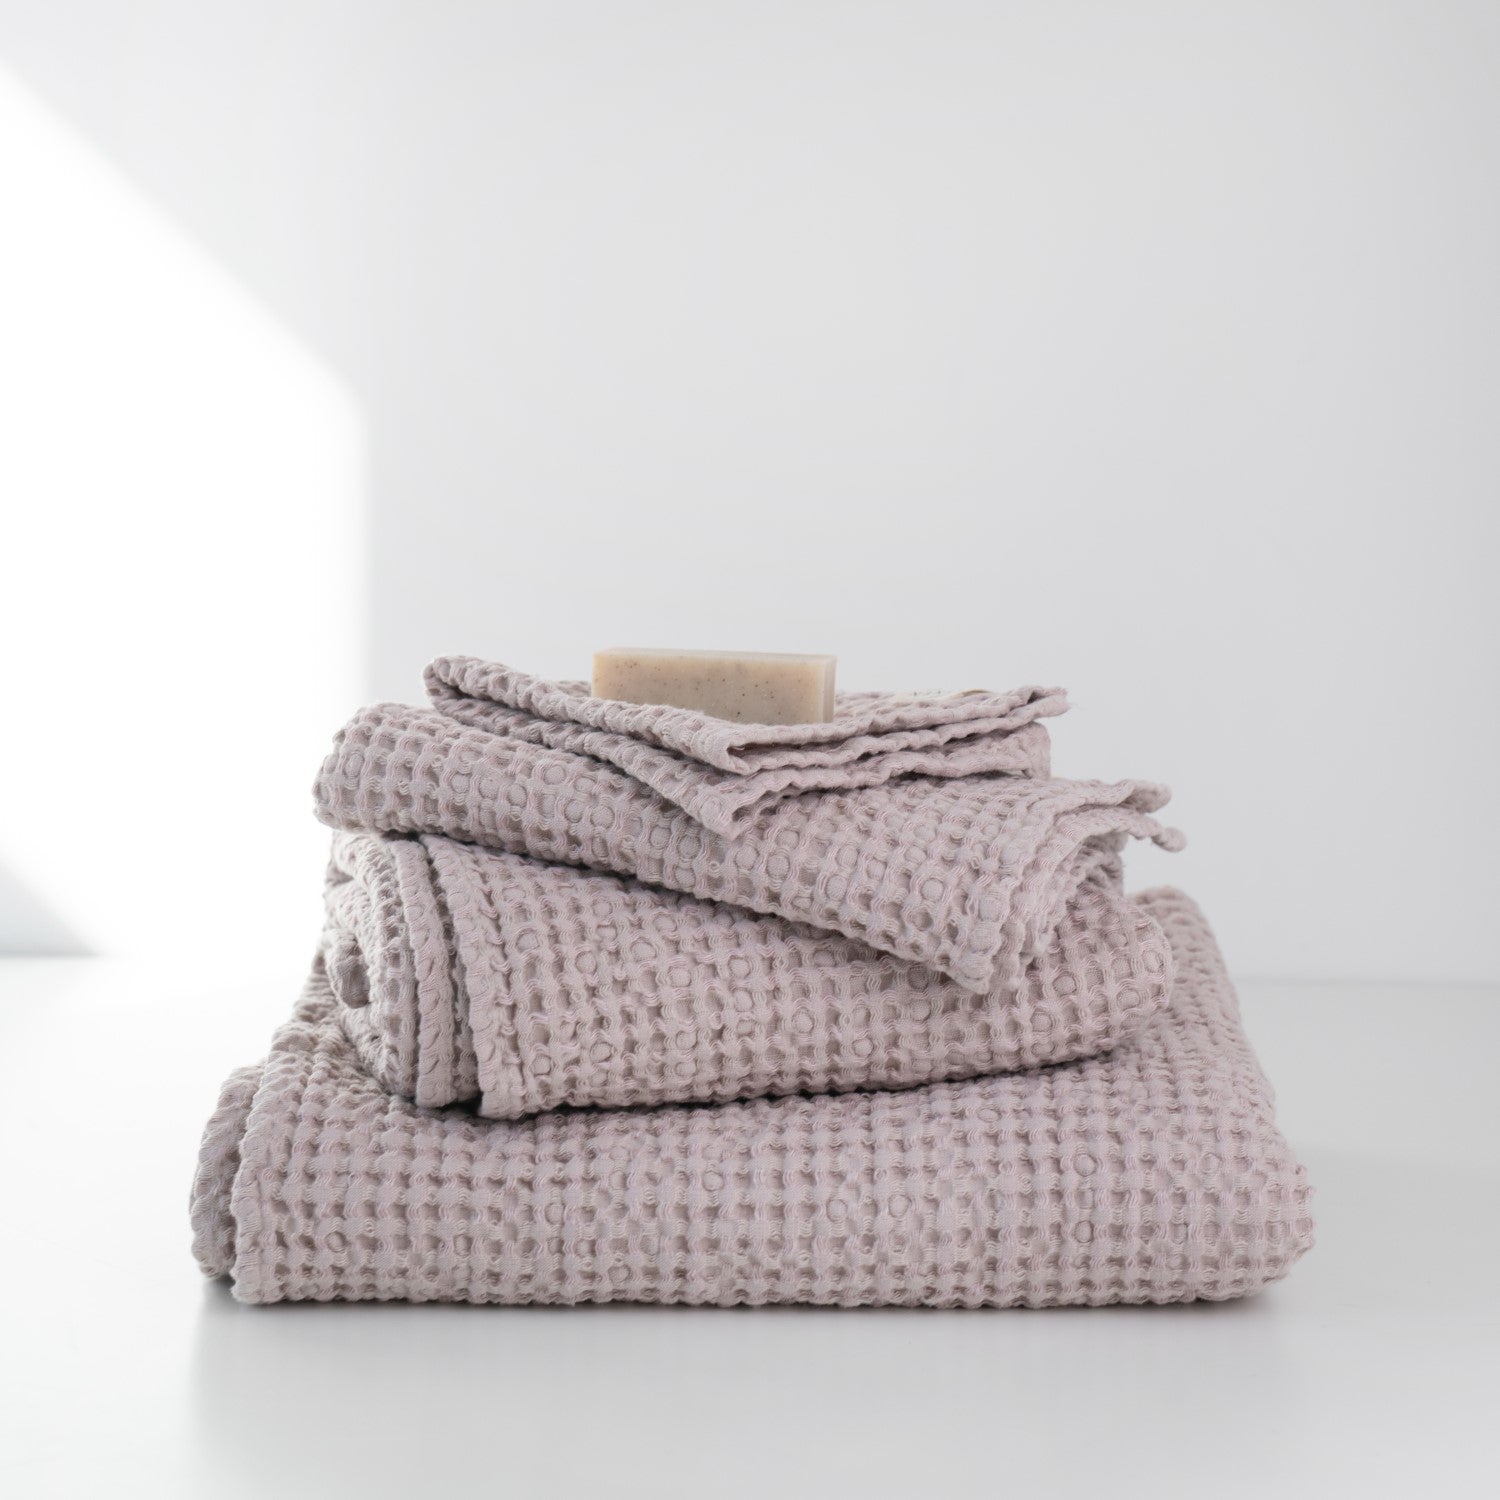 Linen Waffle Weave Kitchen Towels in Various Colors Hand -  Singapore